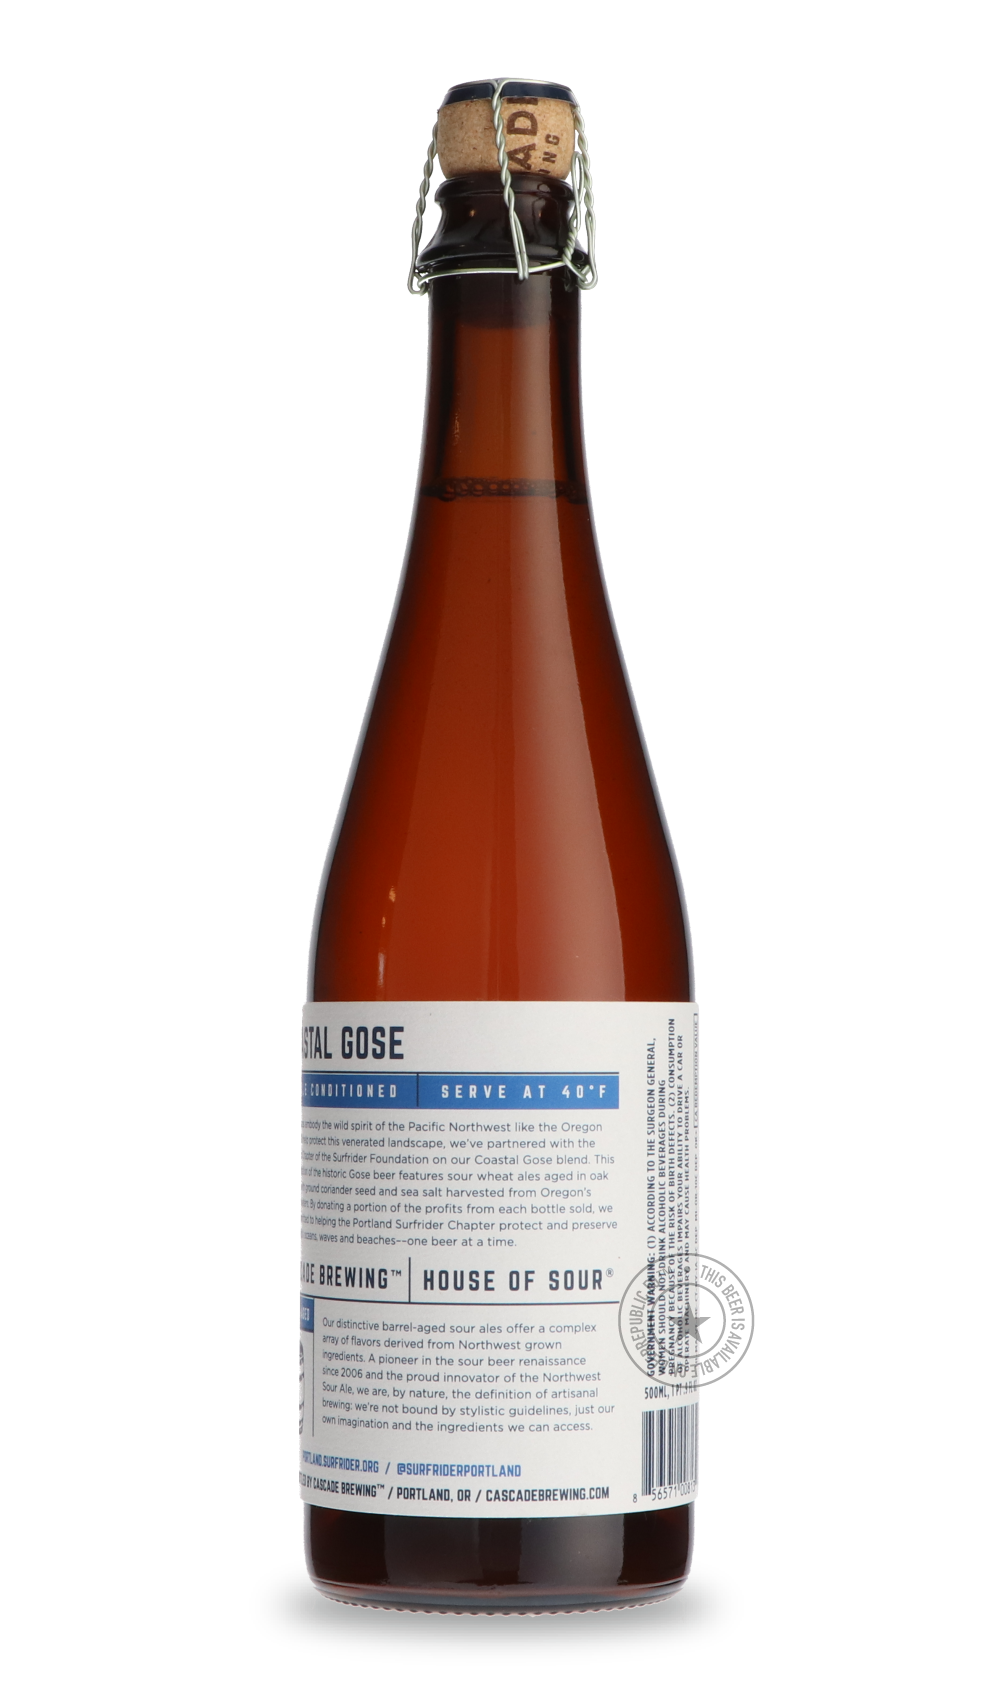 -Cascade- Coastal Gose-Sour / Wild & Fruity- Only @ Beer Republic - The best online beer store for American & Canadian craft beer - Buy beer online from the USA and Canada - Bier online kopen - Amerikaans bier kopen - Craft beer store - Craft beer kopen - Amerikanisch bier kaufen - Bier online kaufen - Acheter biere online - IPA - Stout - Porter - New England IPA - Hazy IPA - Imperial Stout - Barrel Aged - Barrel Aged Imperial Stout - Brown - Dark beer - Blond - Blonde - Pilsner - Lager - Wheat - Weizen - A